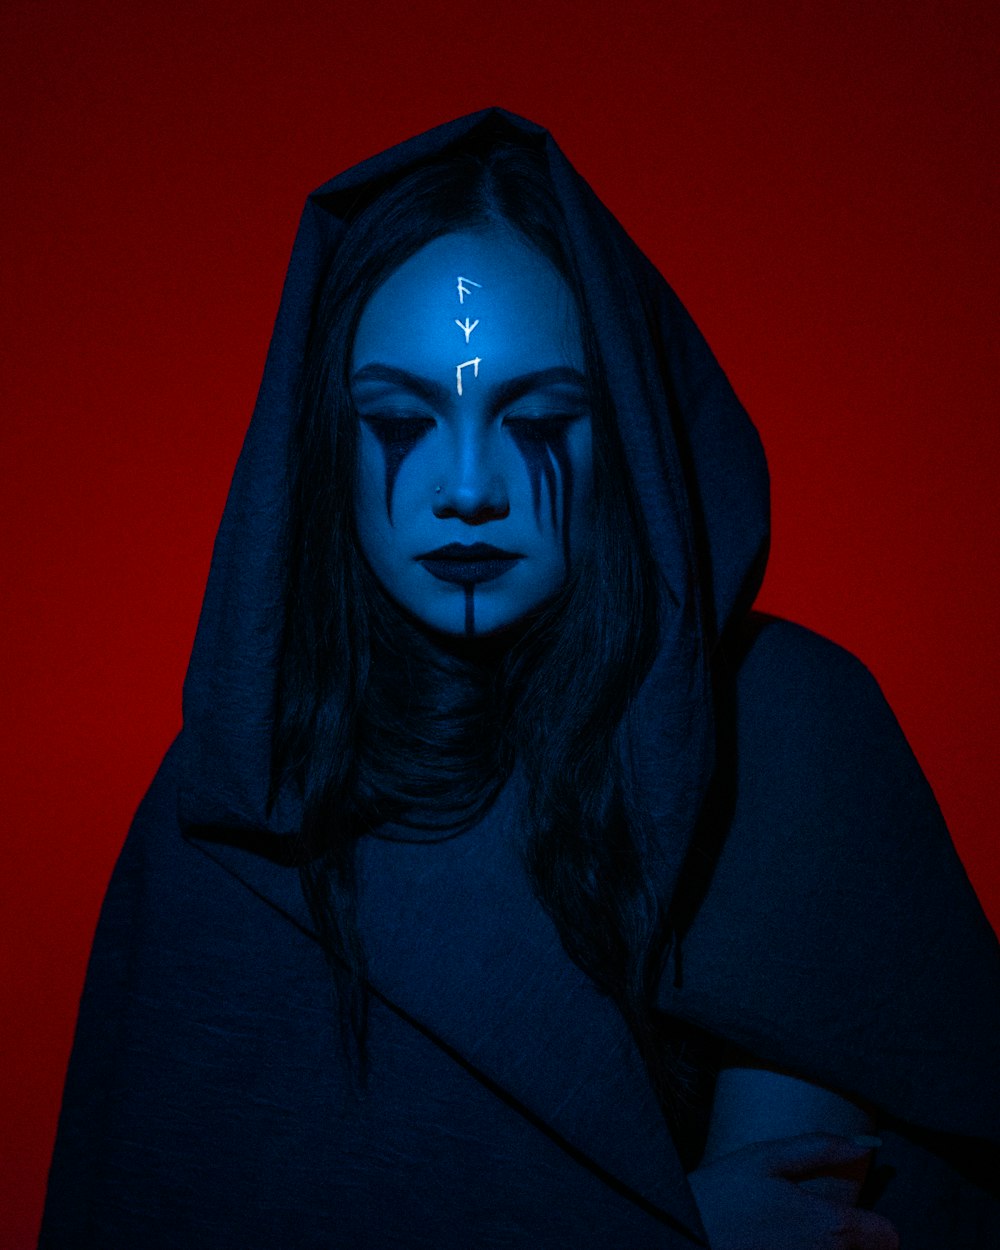 a woman with blue makeup and a hoodie with arrows painted on her face